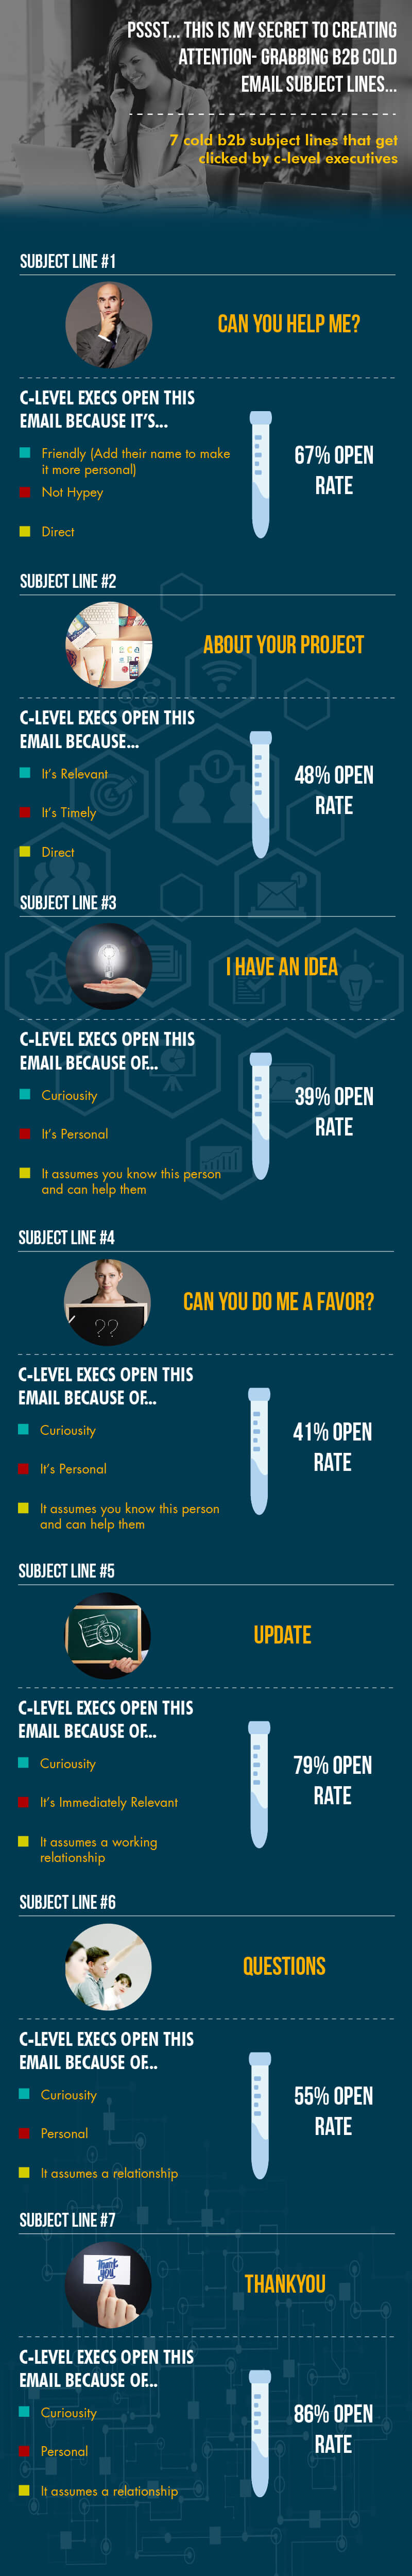 7 Cold B2B Subject Lines That Get Clicked by C-Level Executives